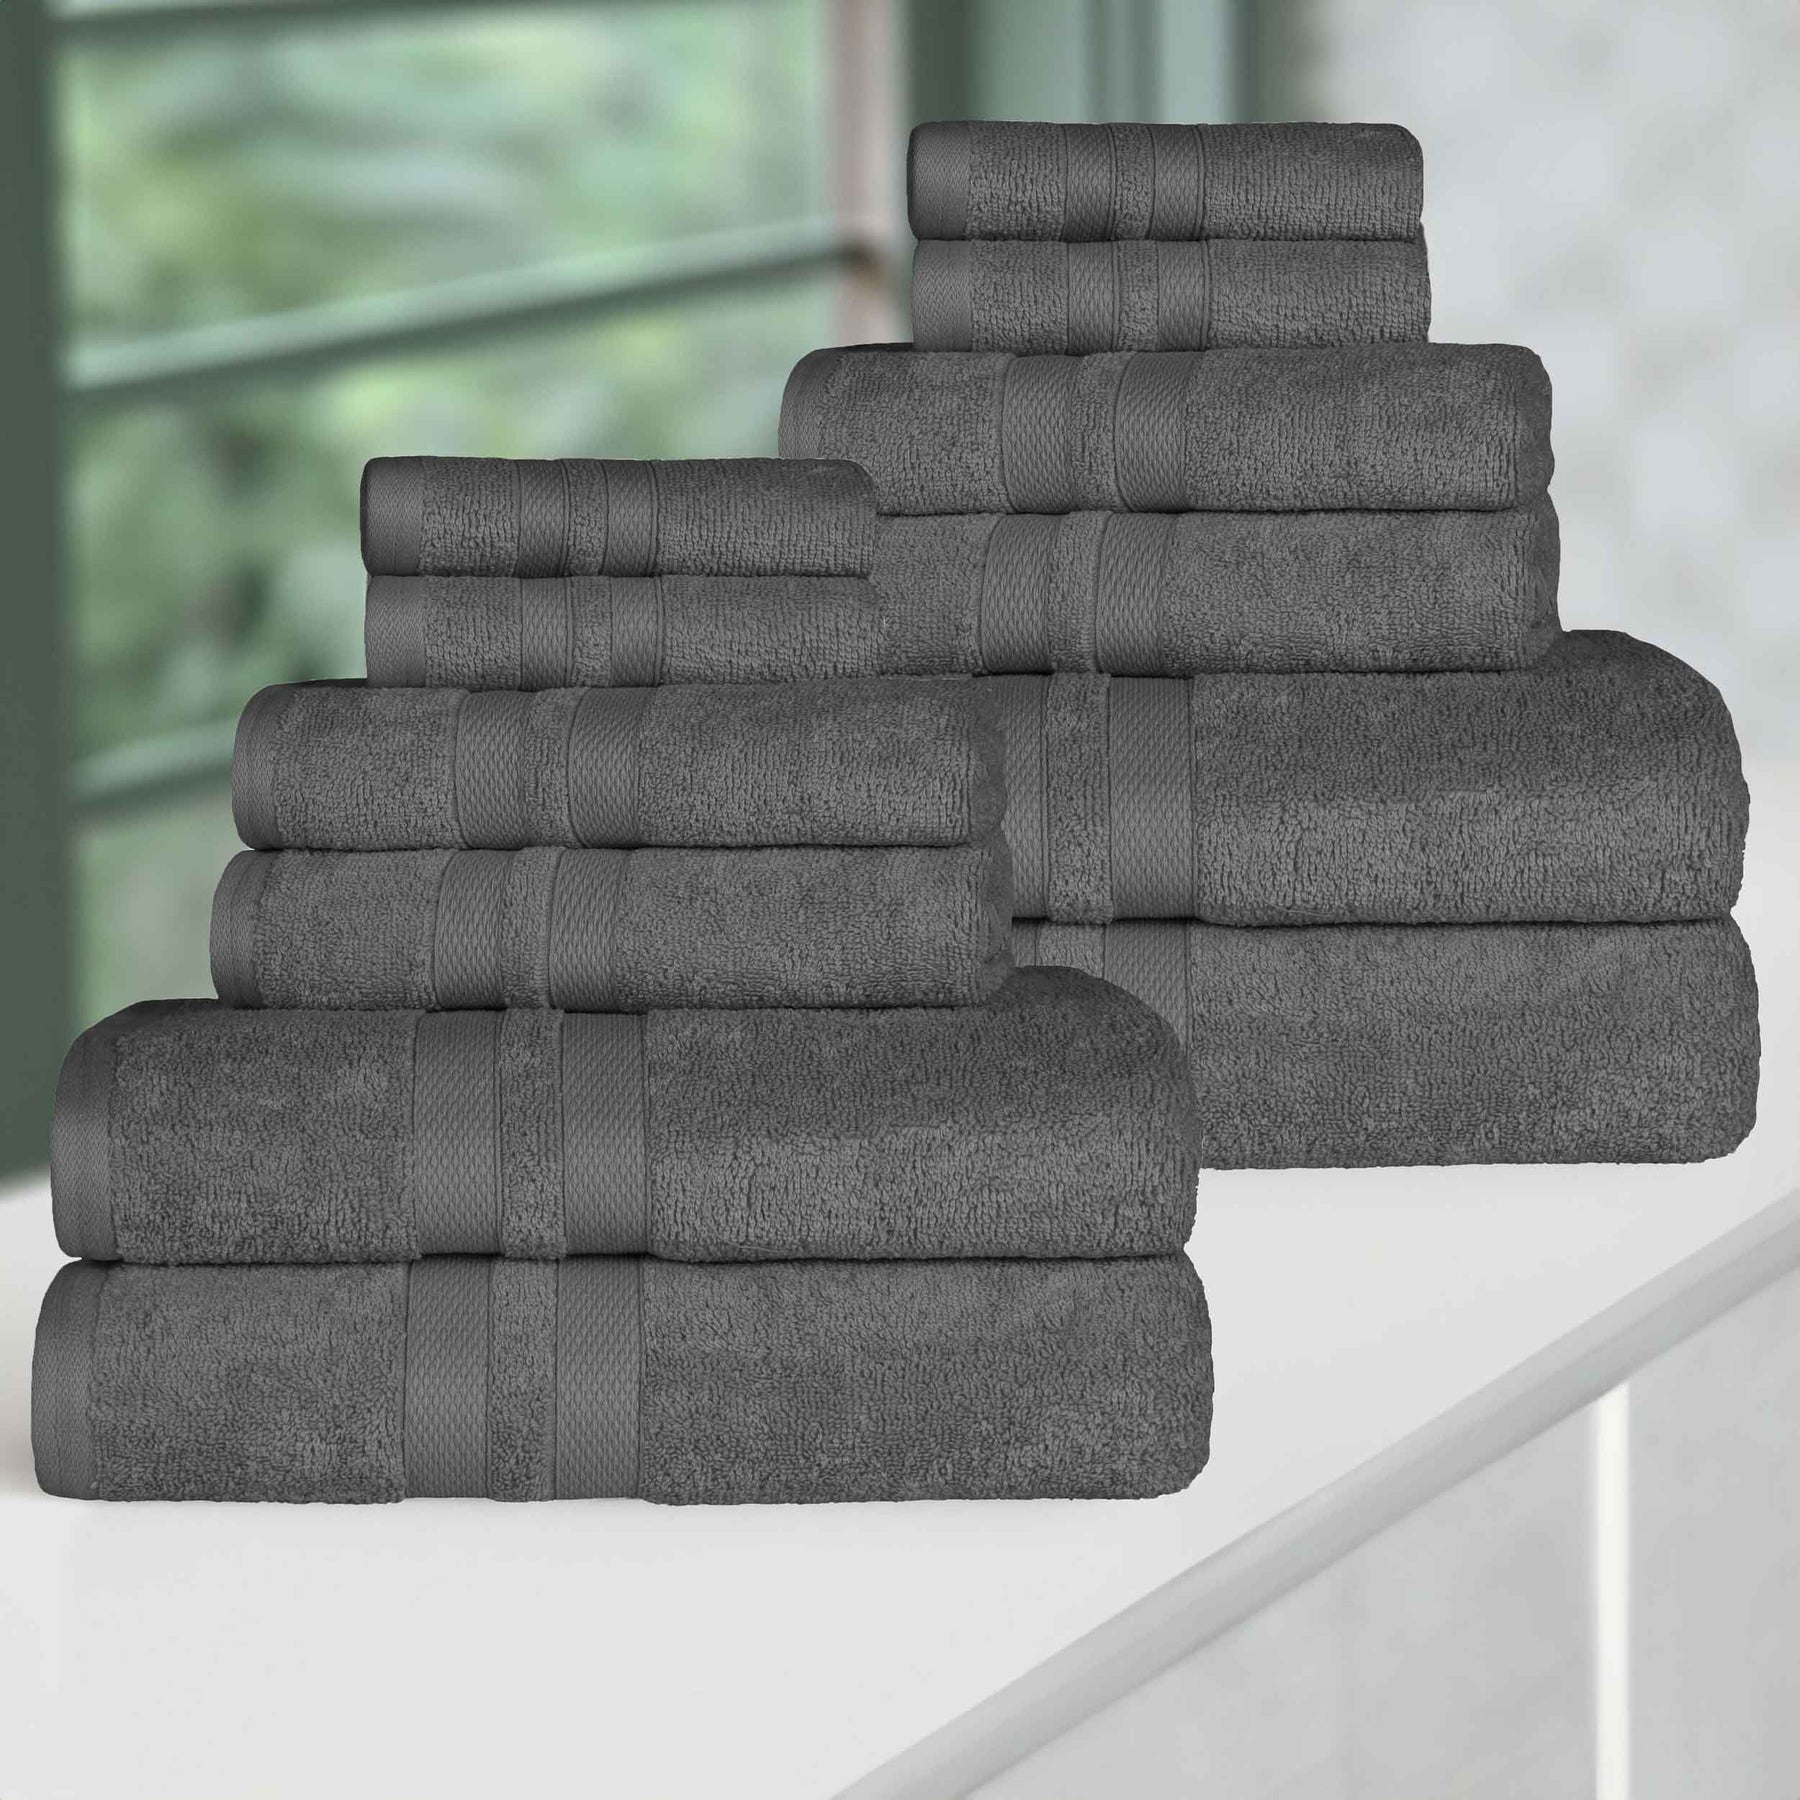 Ultra Soft Cotton Absorbent Quick Drying 12 Piece Assorted Towel Set - Charcoal